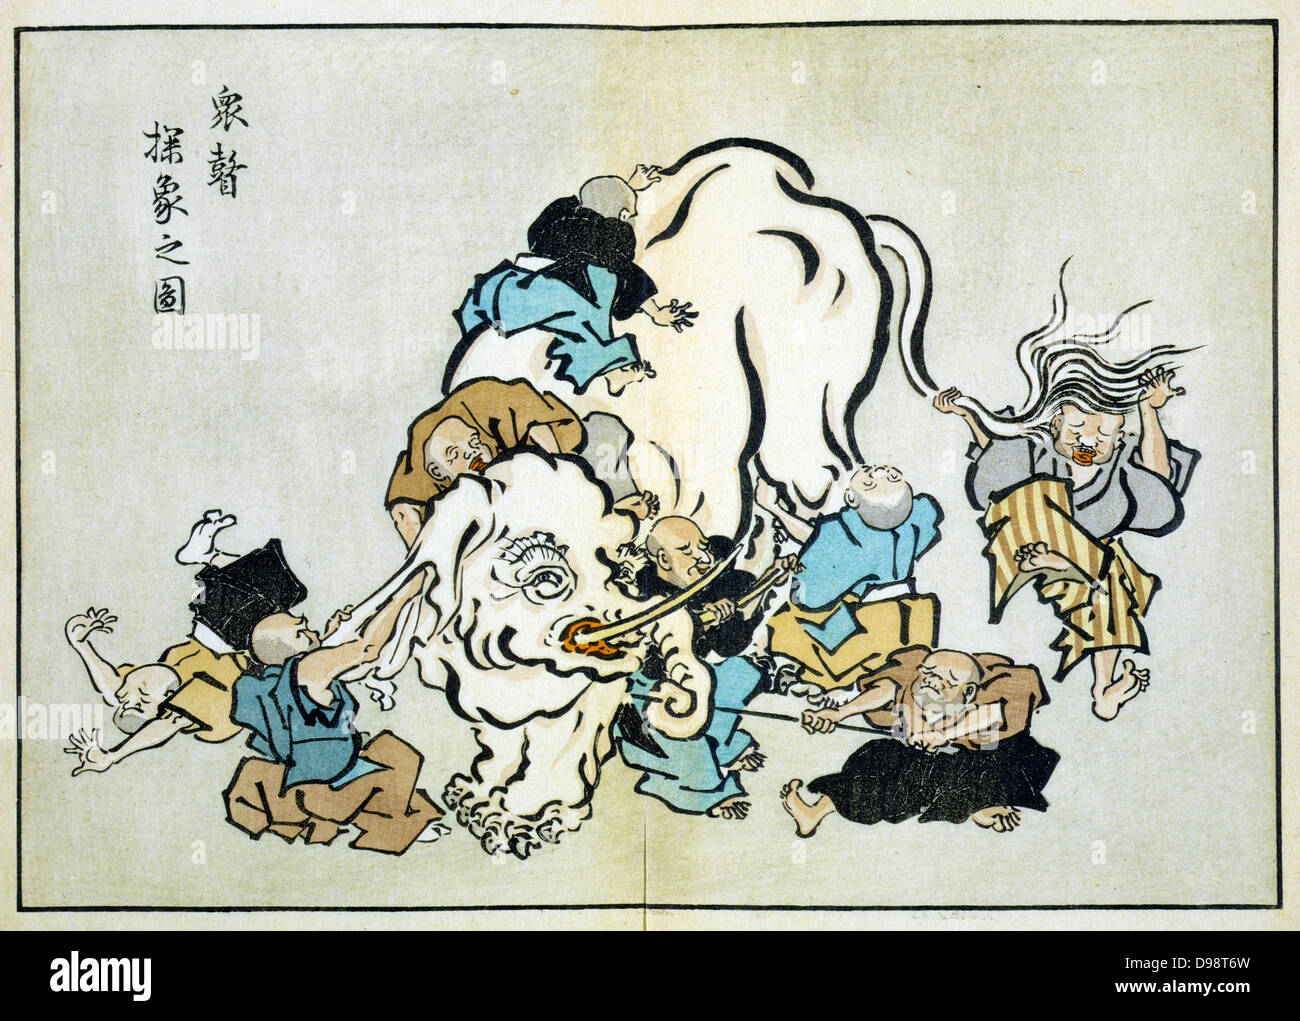 Blind Monks Examining an Elephant: Illustration of Buddhist parable where each monk reached a different conclusion depending which part of the animal he examined. Itcho Hanabusa (1652-1754), Japanese artist. Religion Buddhism Stock Photo